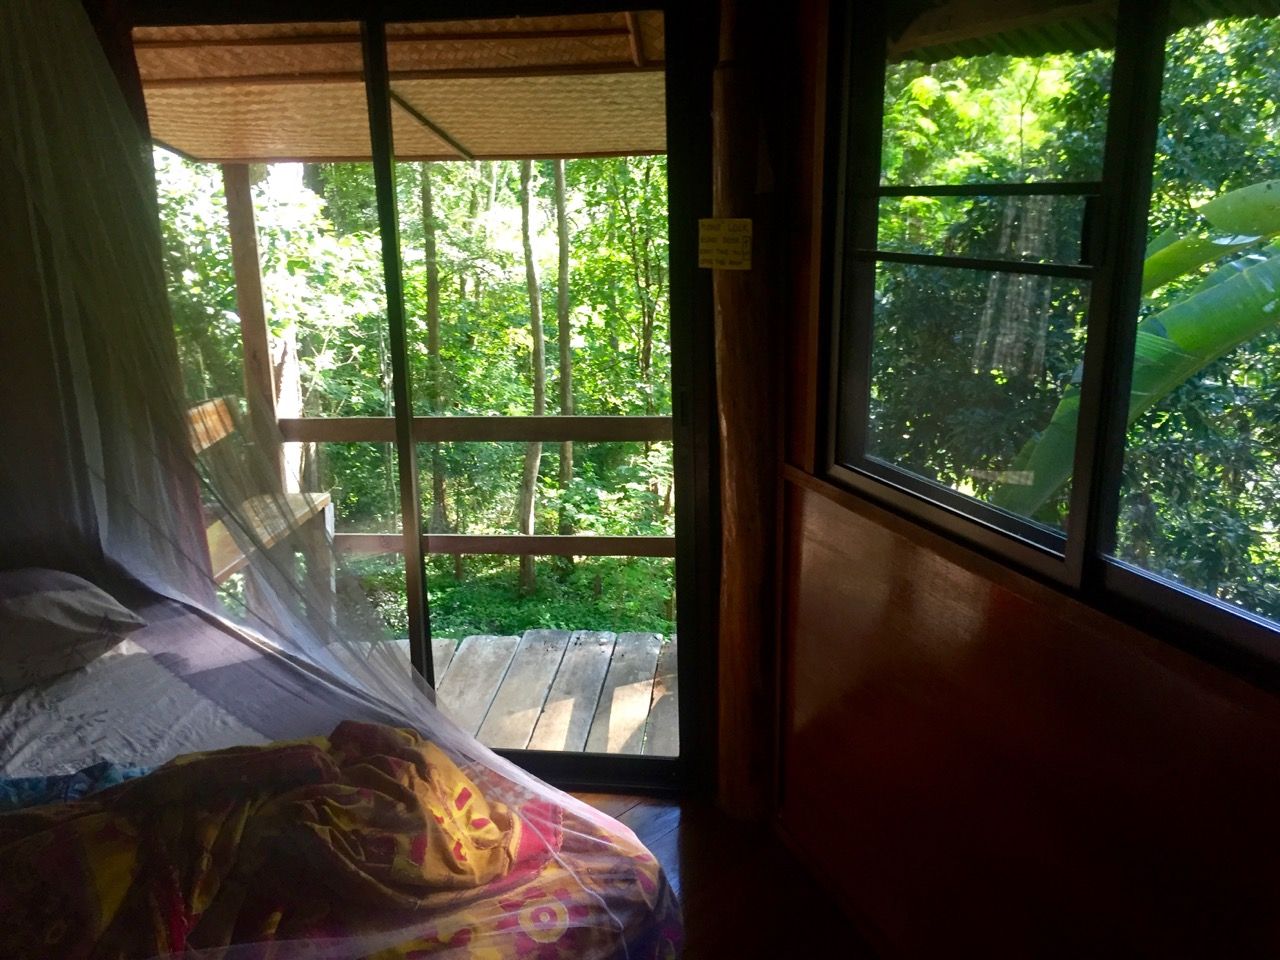 Inside a bedroom looking out into the treetops.